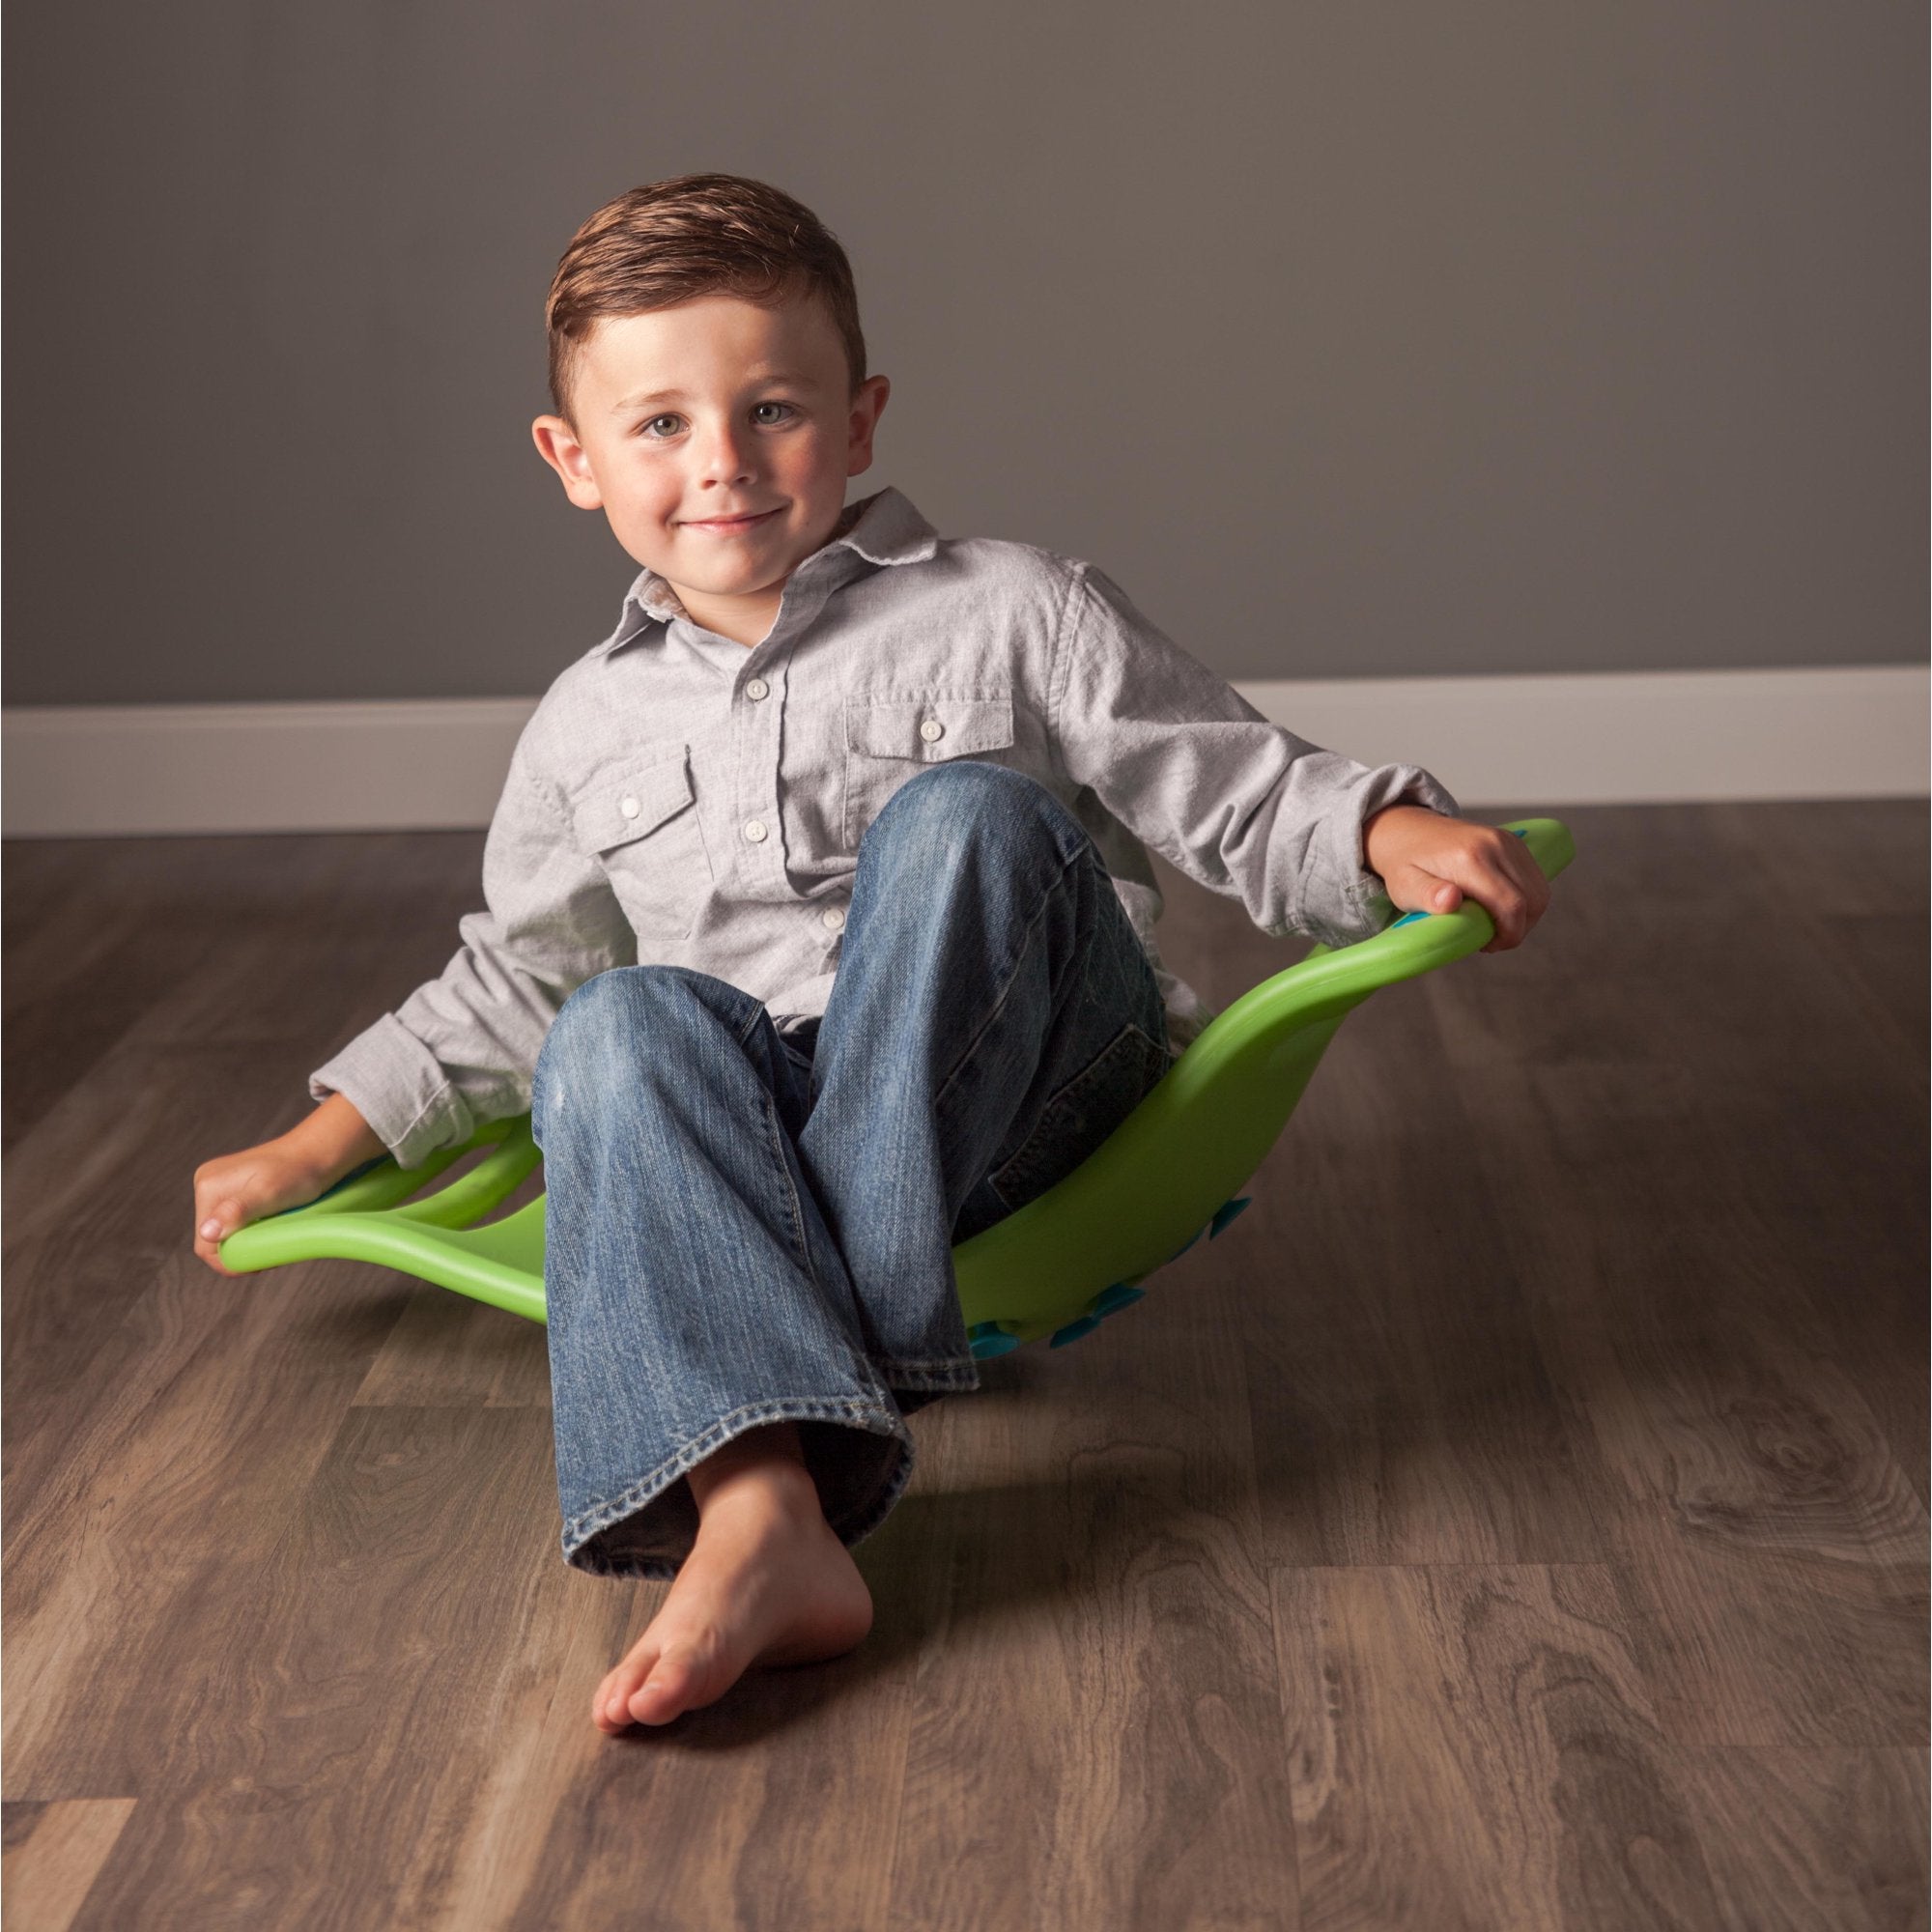 A child with light skin tone and short brown hair is sitting in the green Teeter Popper. Their legs are crossed and they are leaning back.